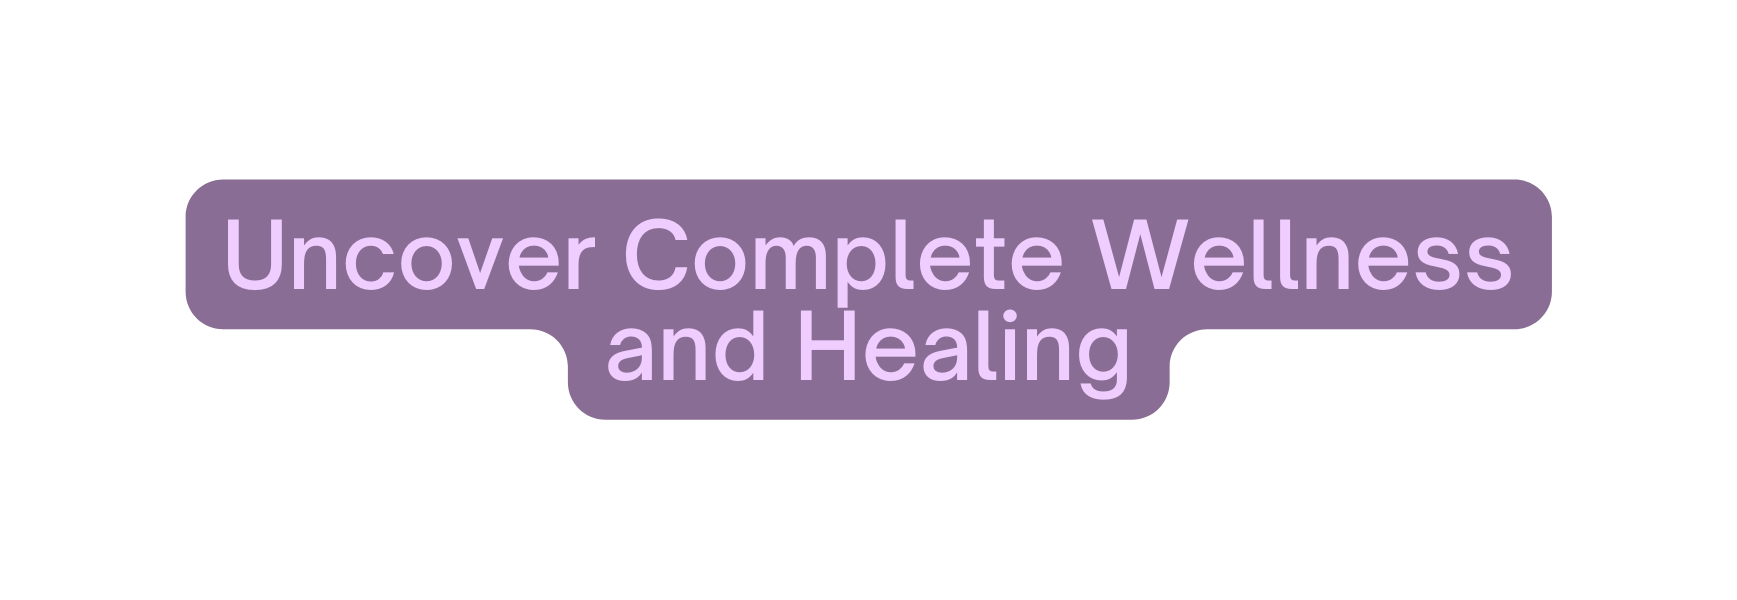 Uncover Complete Wellness and Healing